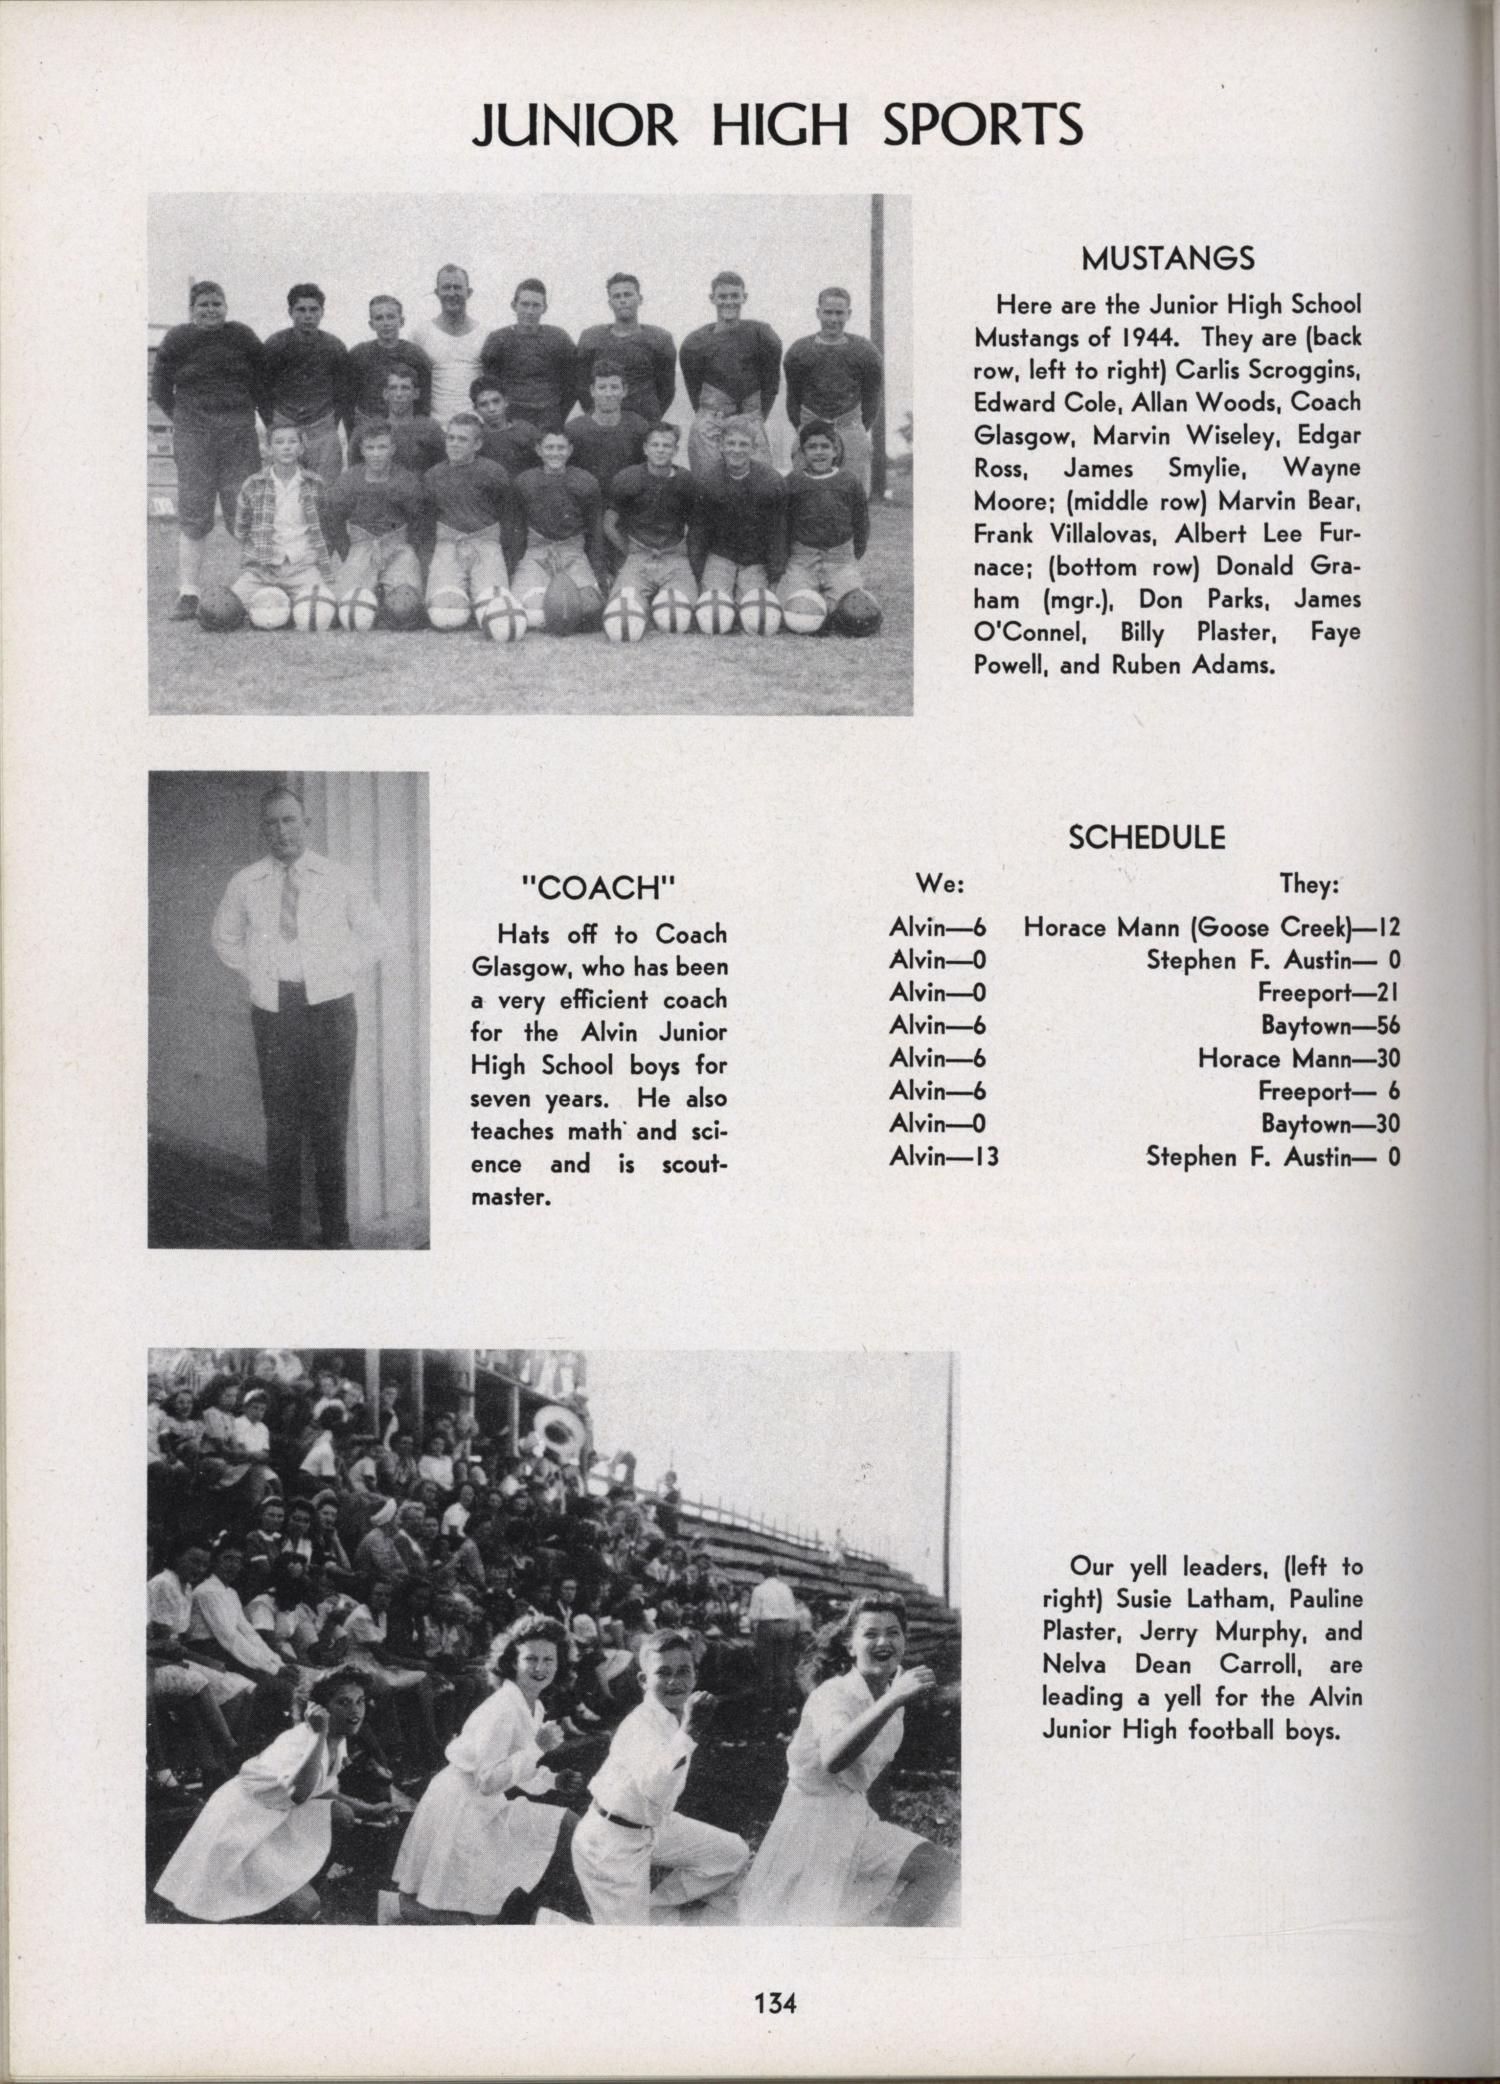 Yearbook 134